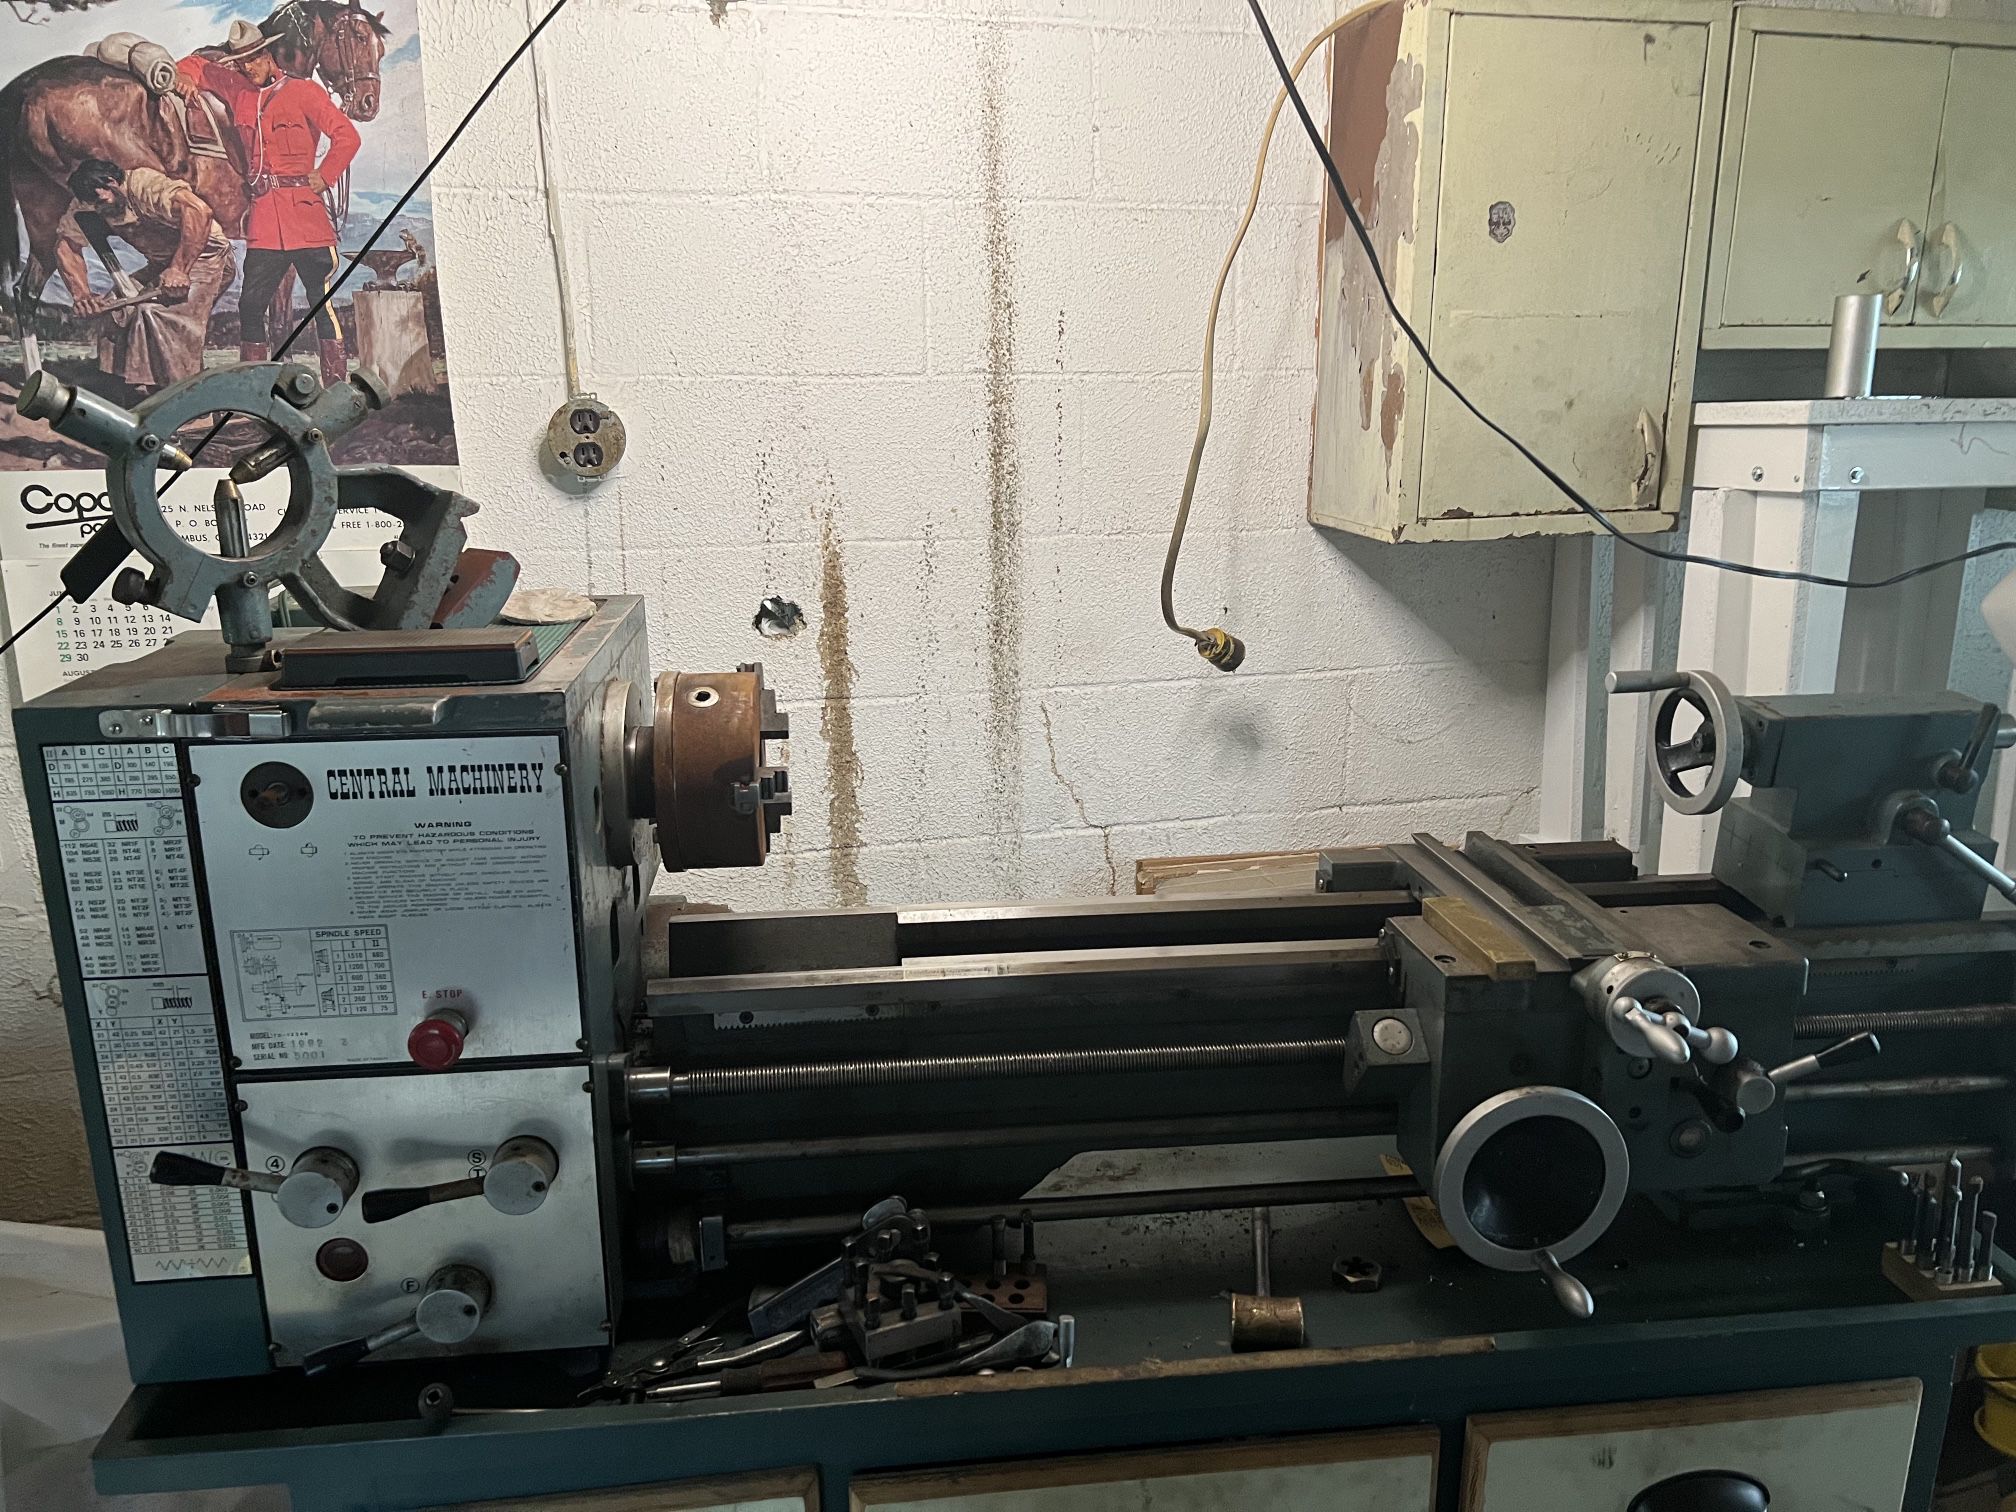 Central Machinery Lathe